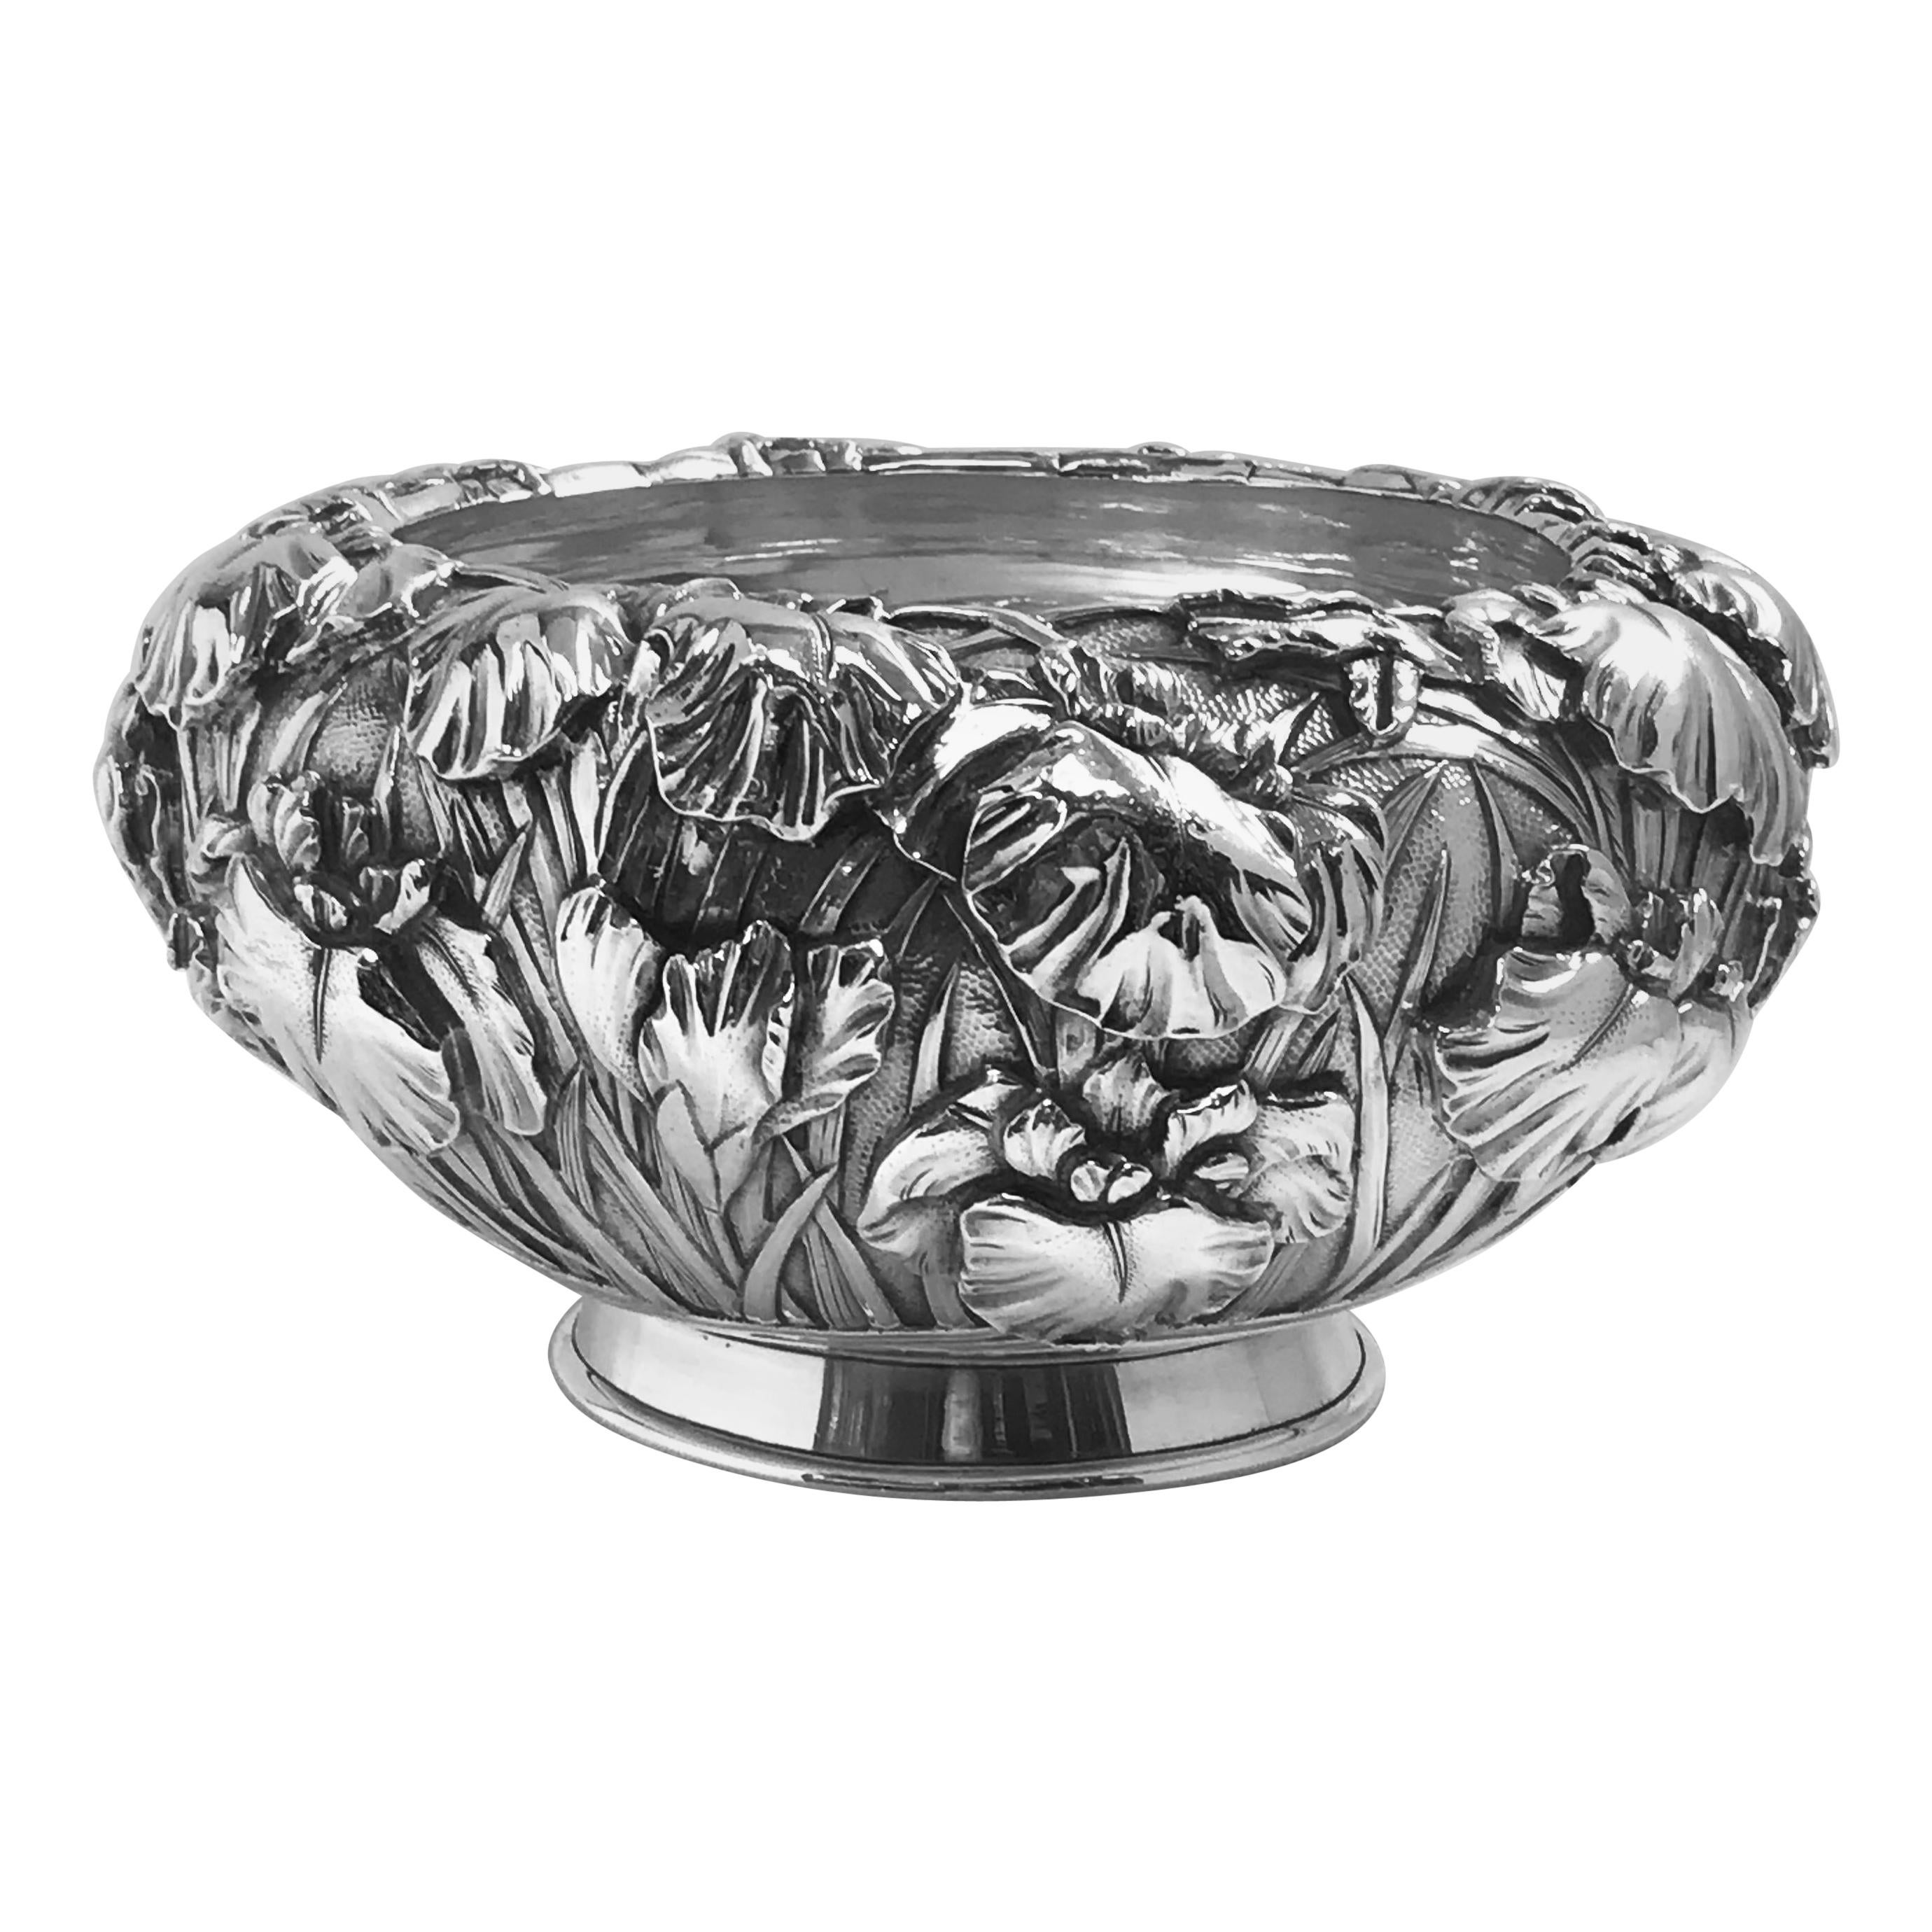 A fine Japanese silver bowl from the Meiji period of traditional double-skin, or double-wall, construction, showing especially detailed irises around the outside and with a smooth, plain interior. The base has the 